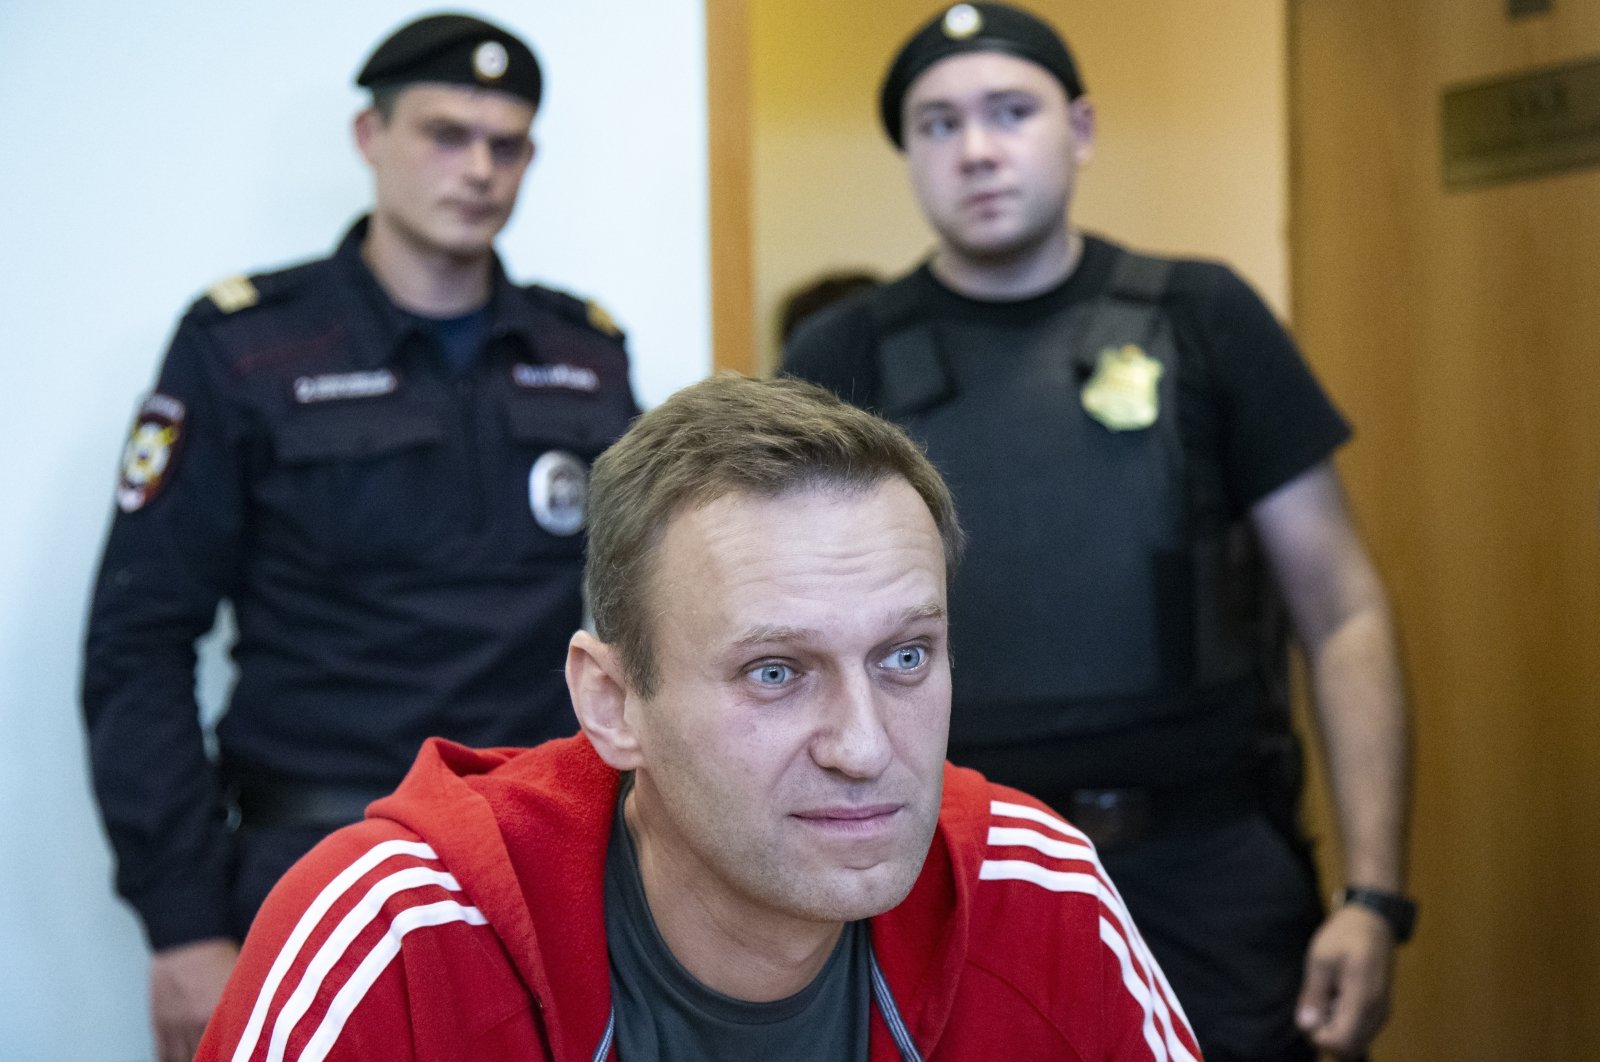 Russian opposition leader Alexei Navalny speaks to the media prior to a court session in Moscow, Russia, Aug. 22, 2019. (AP Photo)